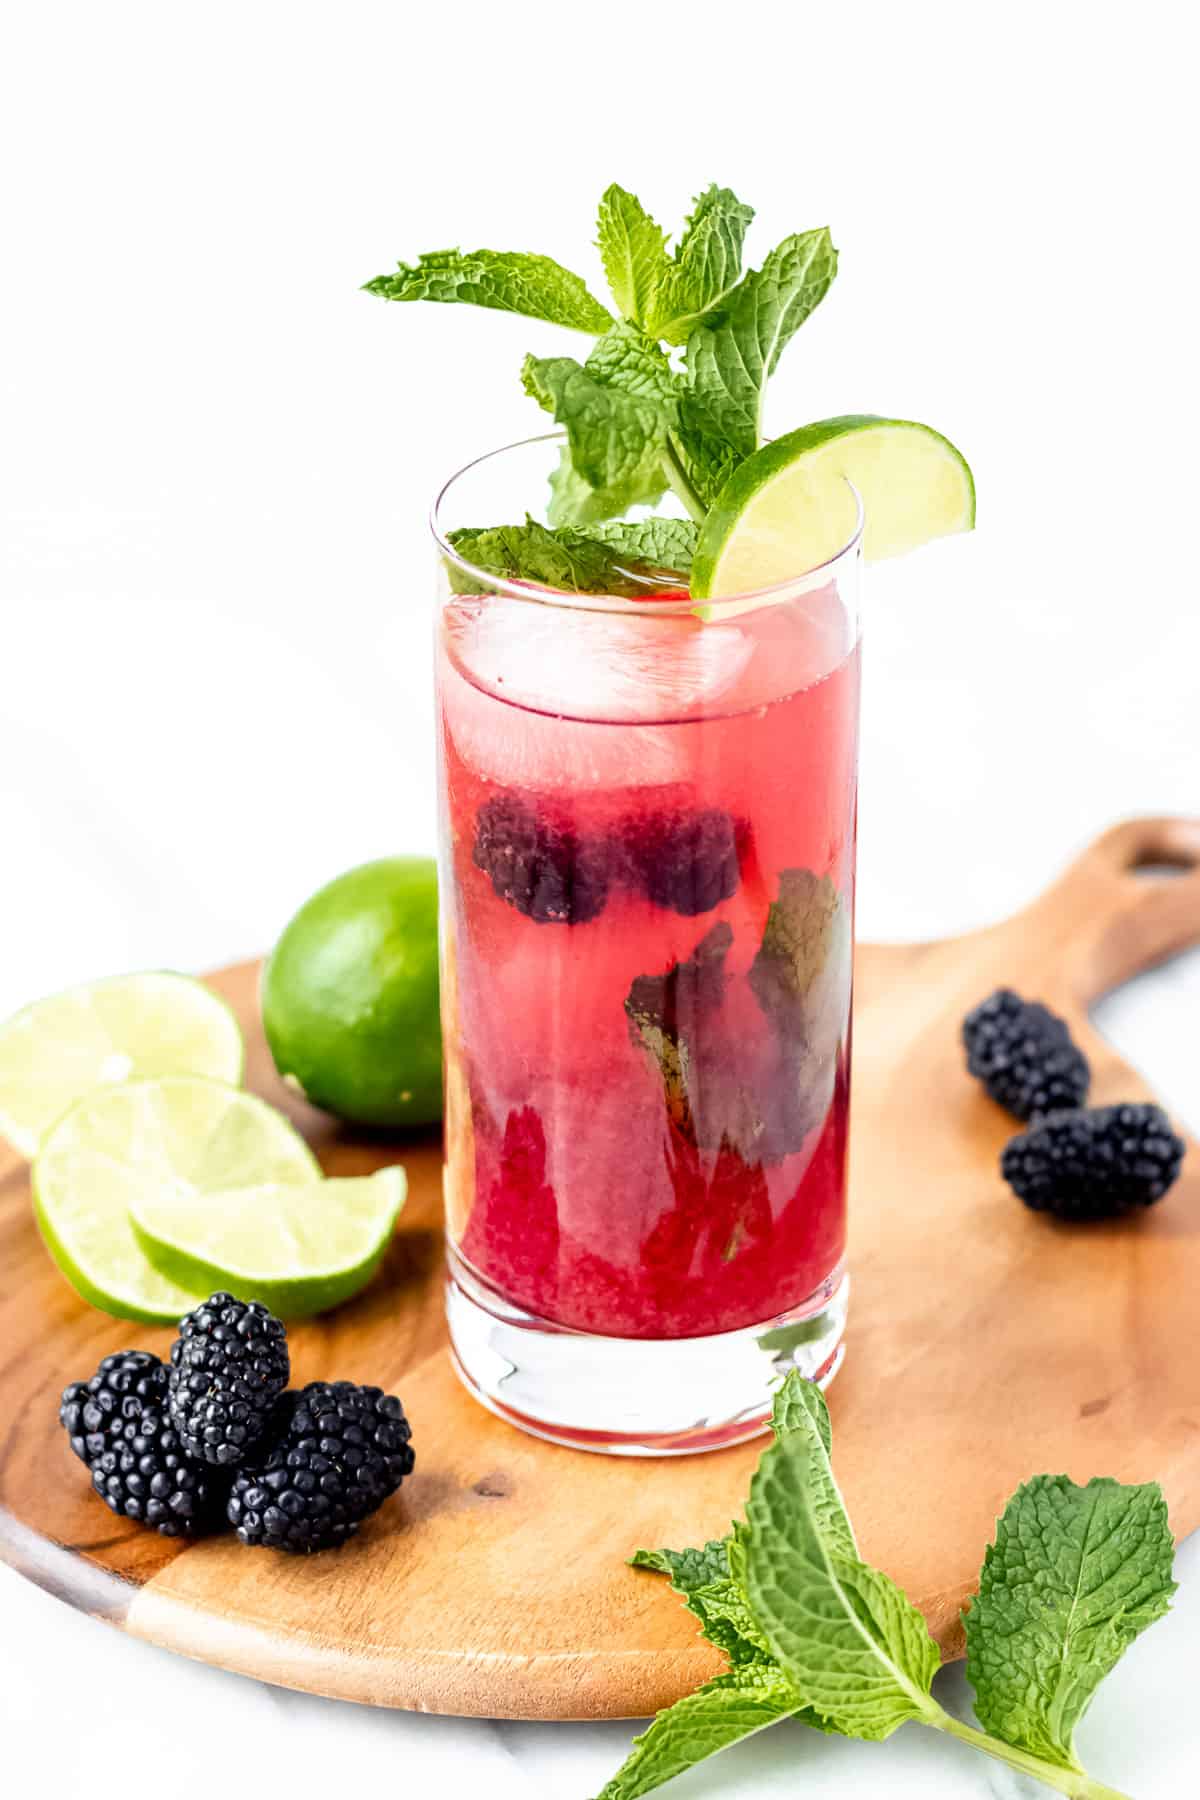 A blackberry mojito on a circular wood board with limes, blackberries and mint leaves around it.